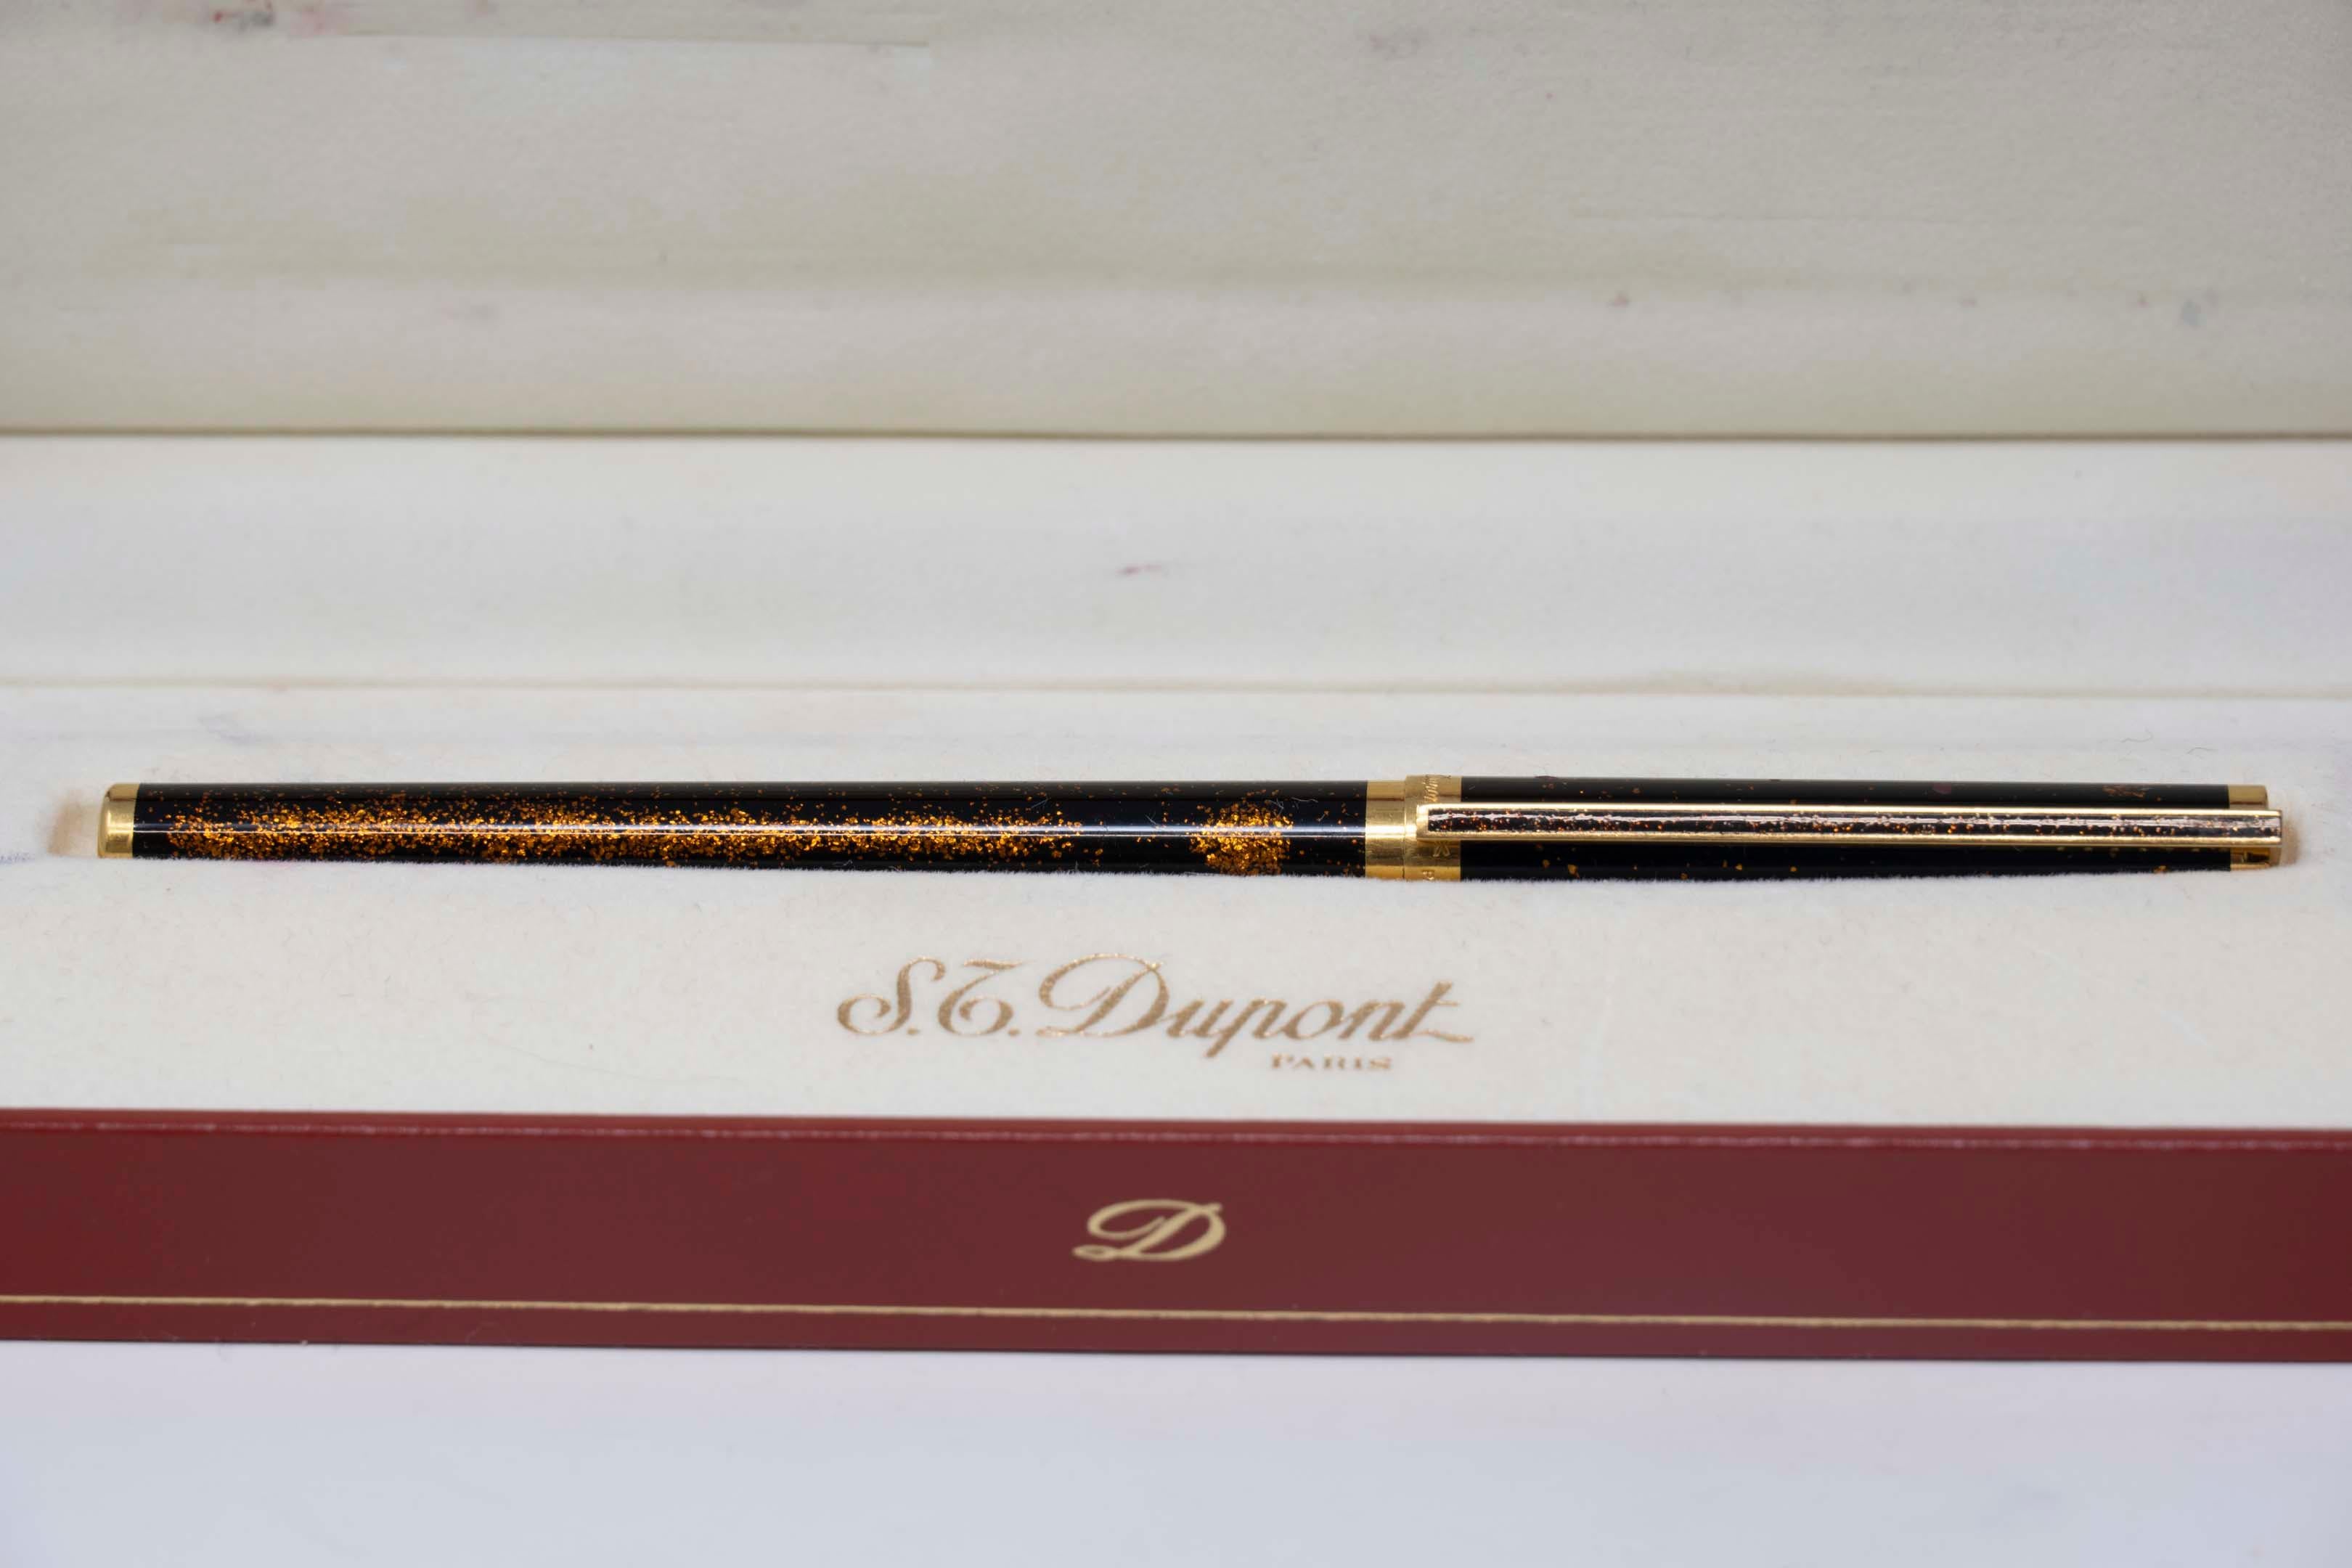 S.T. Dupont Fountain Pen 52BGT80 Laque de Chine with box, 18kt NIB. Circa 1990-1999, gold plated, Laque de Chine Poudre D'Or. Refill to replace. In good condition, rarely used , minimal sign of wear. Made in France.